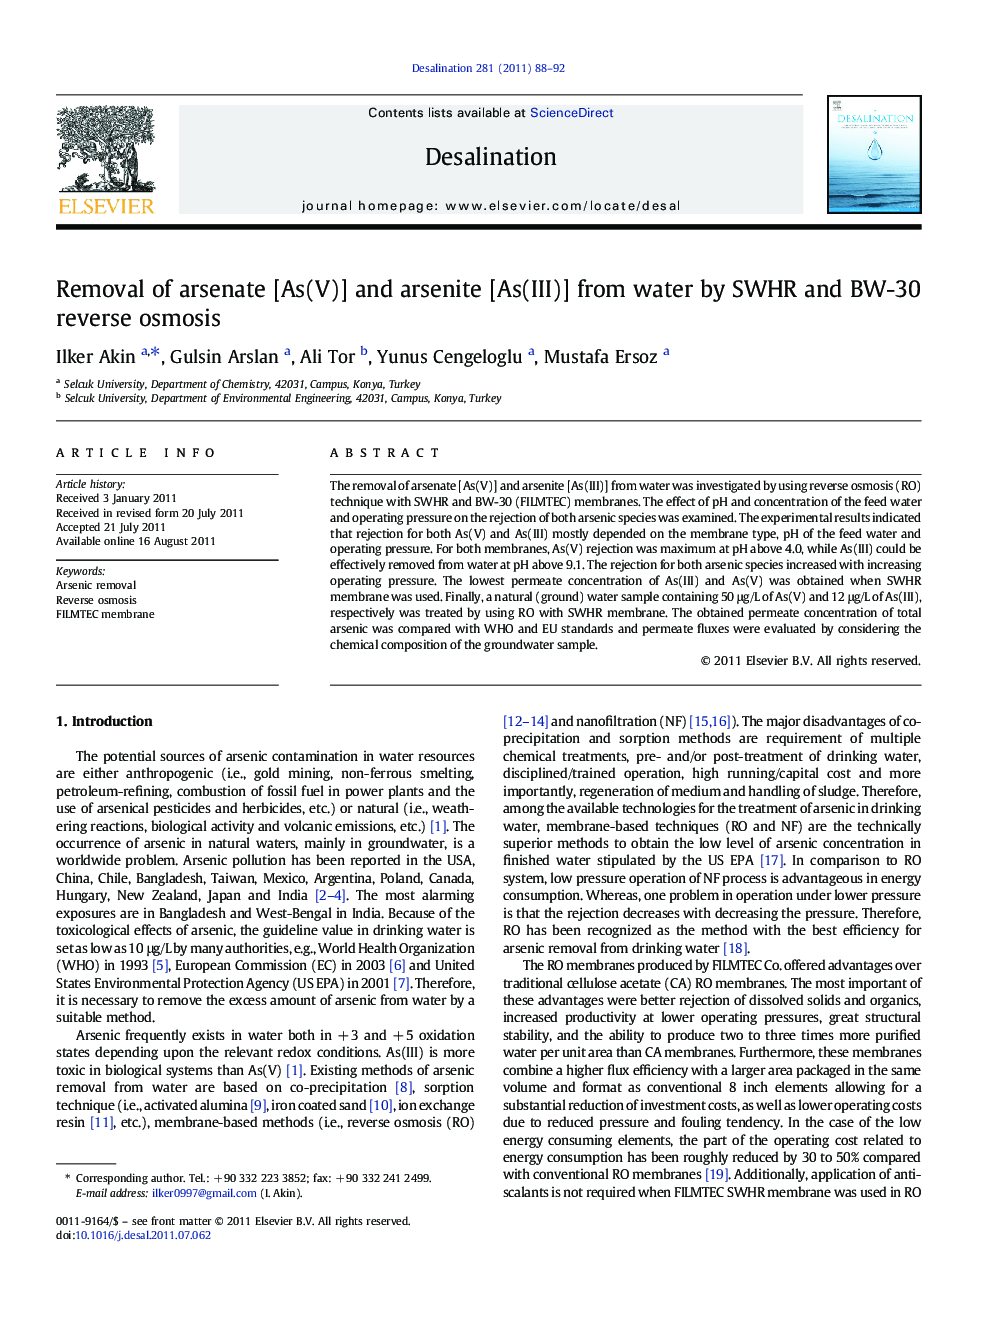 Removal of arsenate [As(V)] and arsenite [As(III)] from water by SWHR and BW-30 reverse osmosis